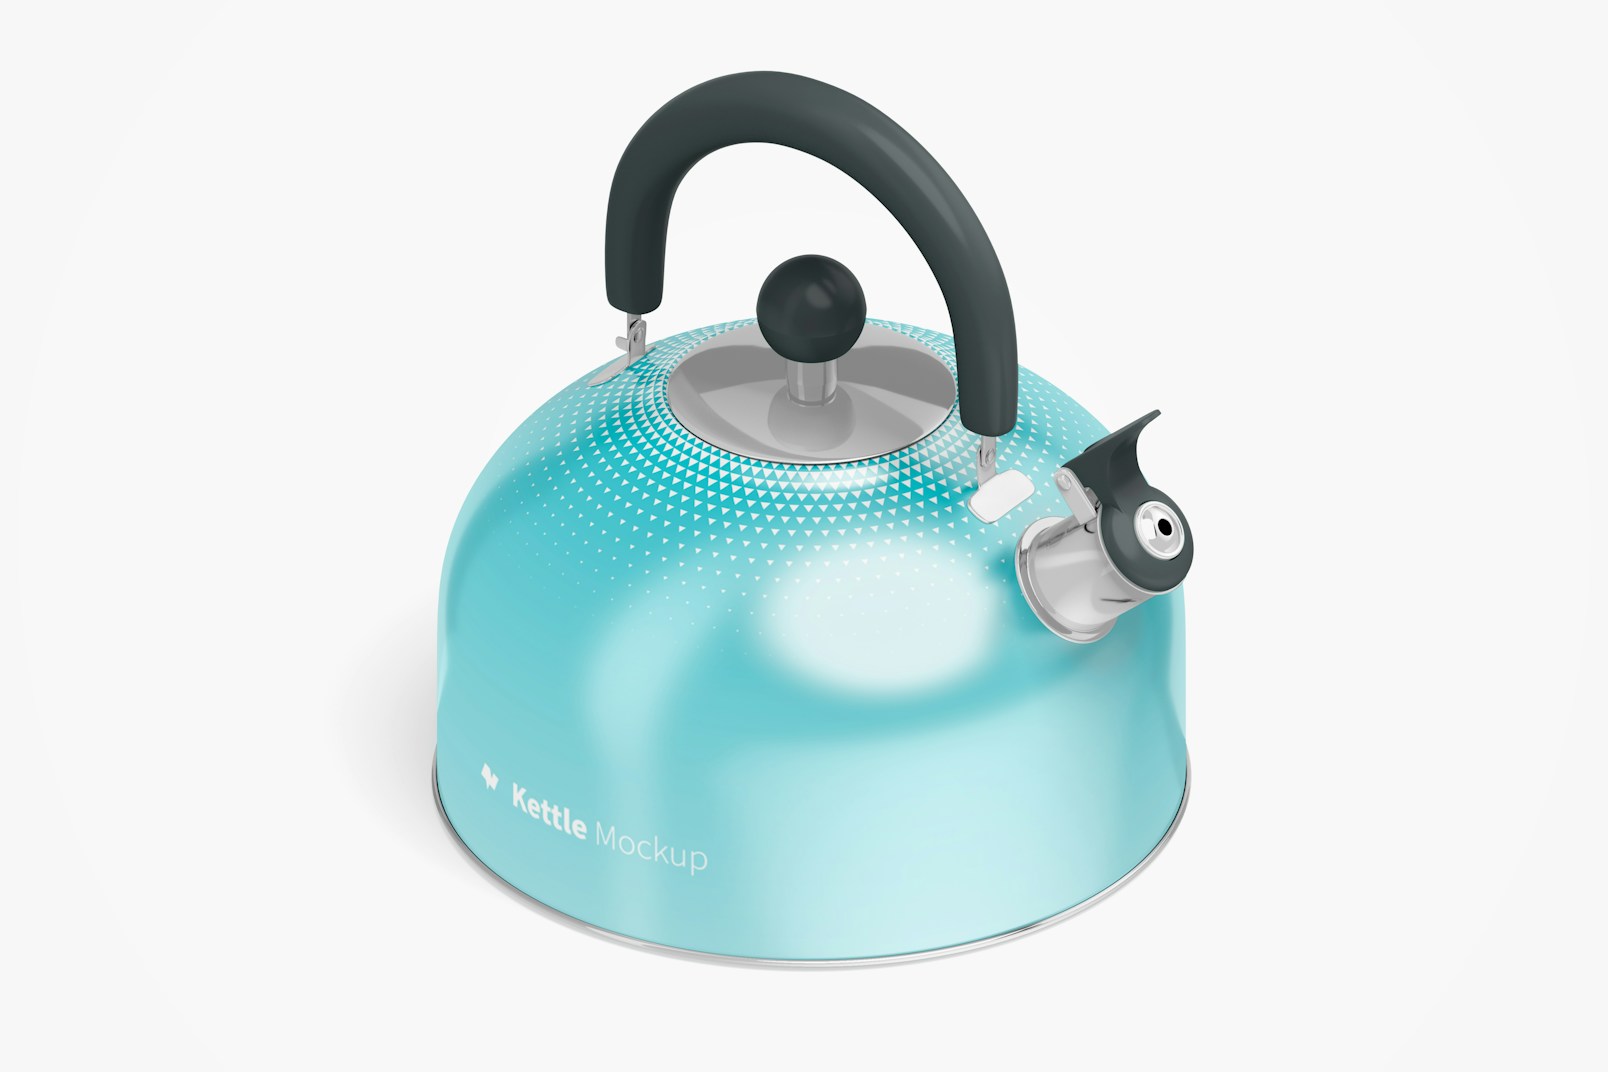 Kettle Mockup, Isometric Right View